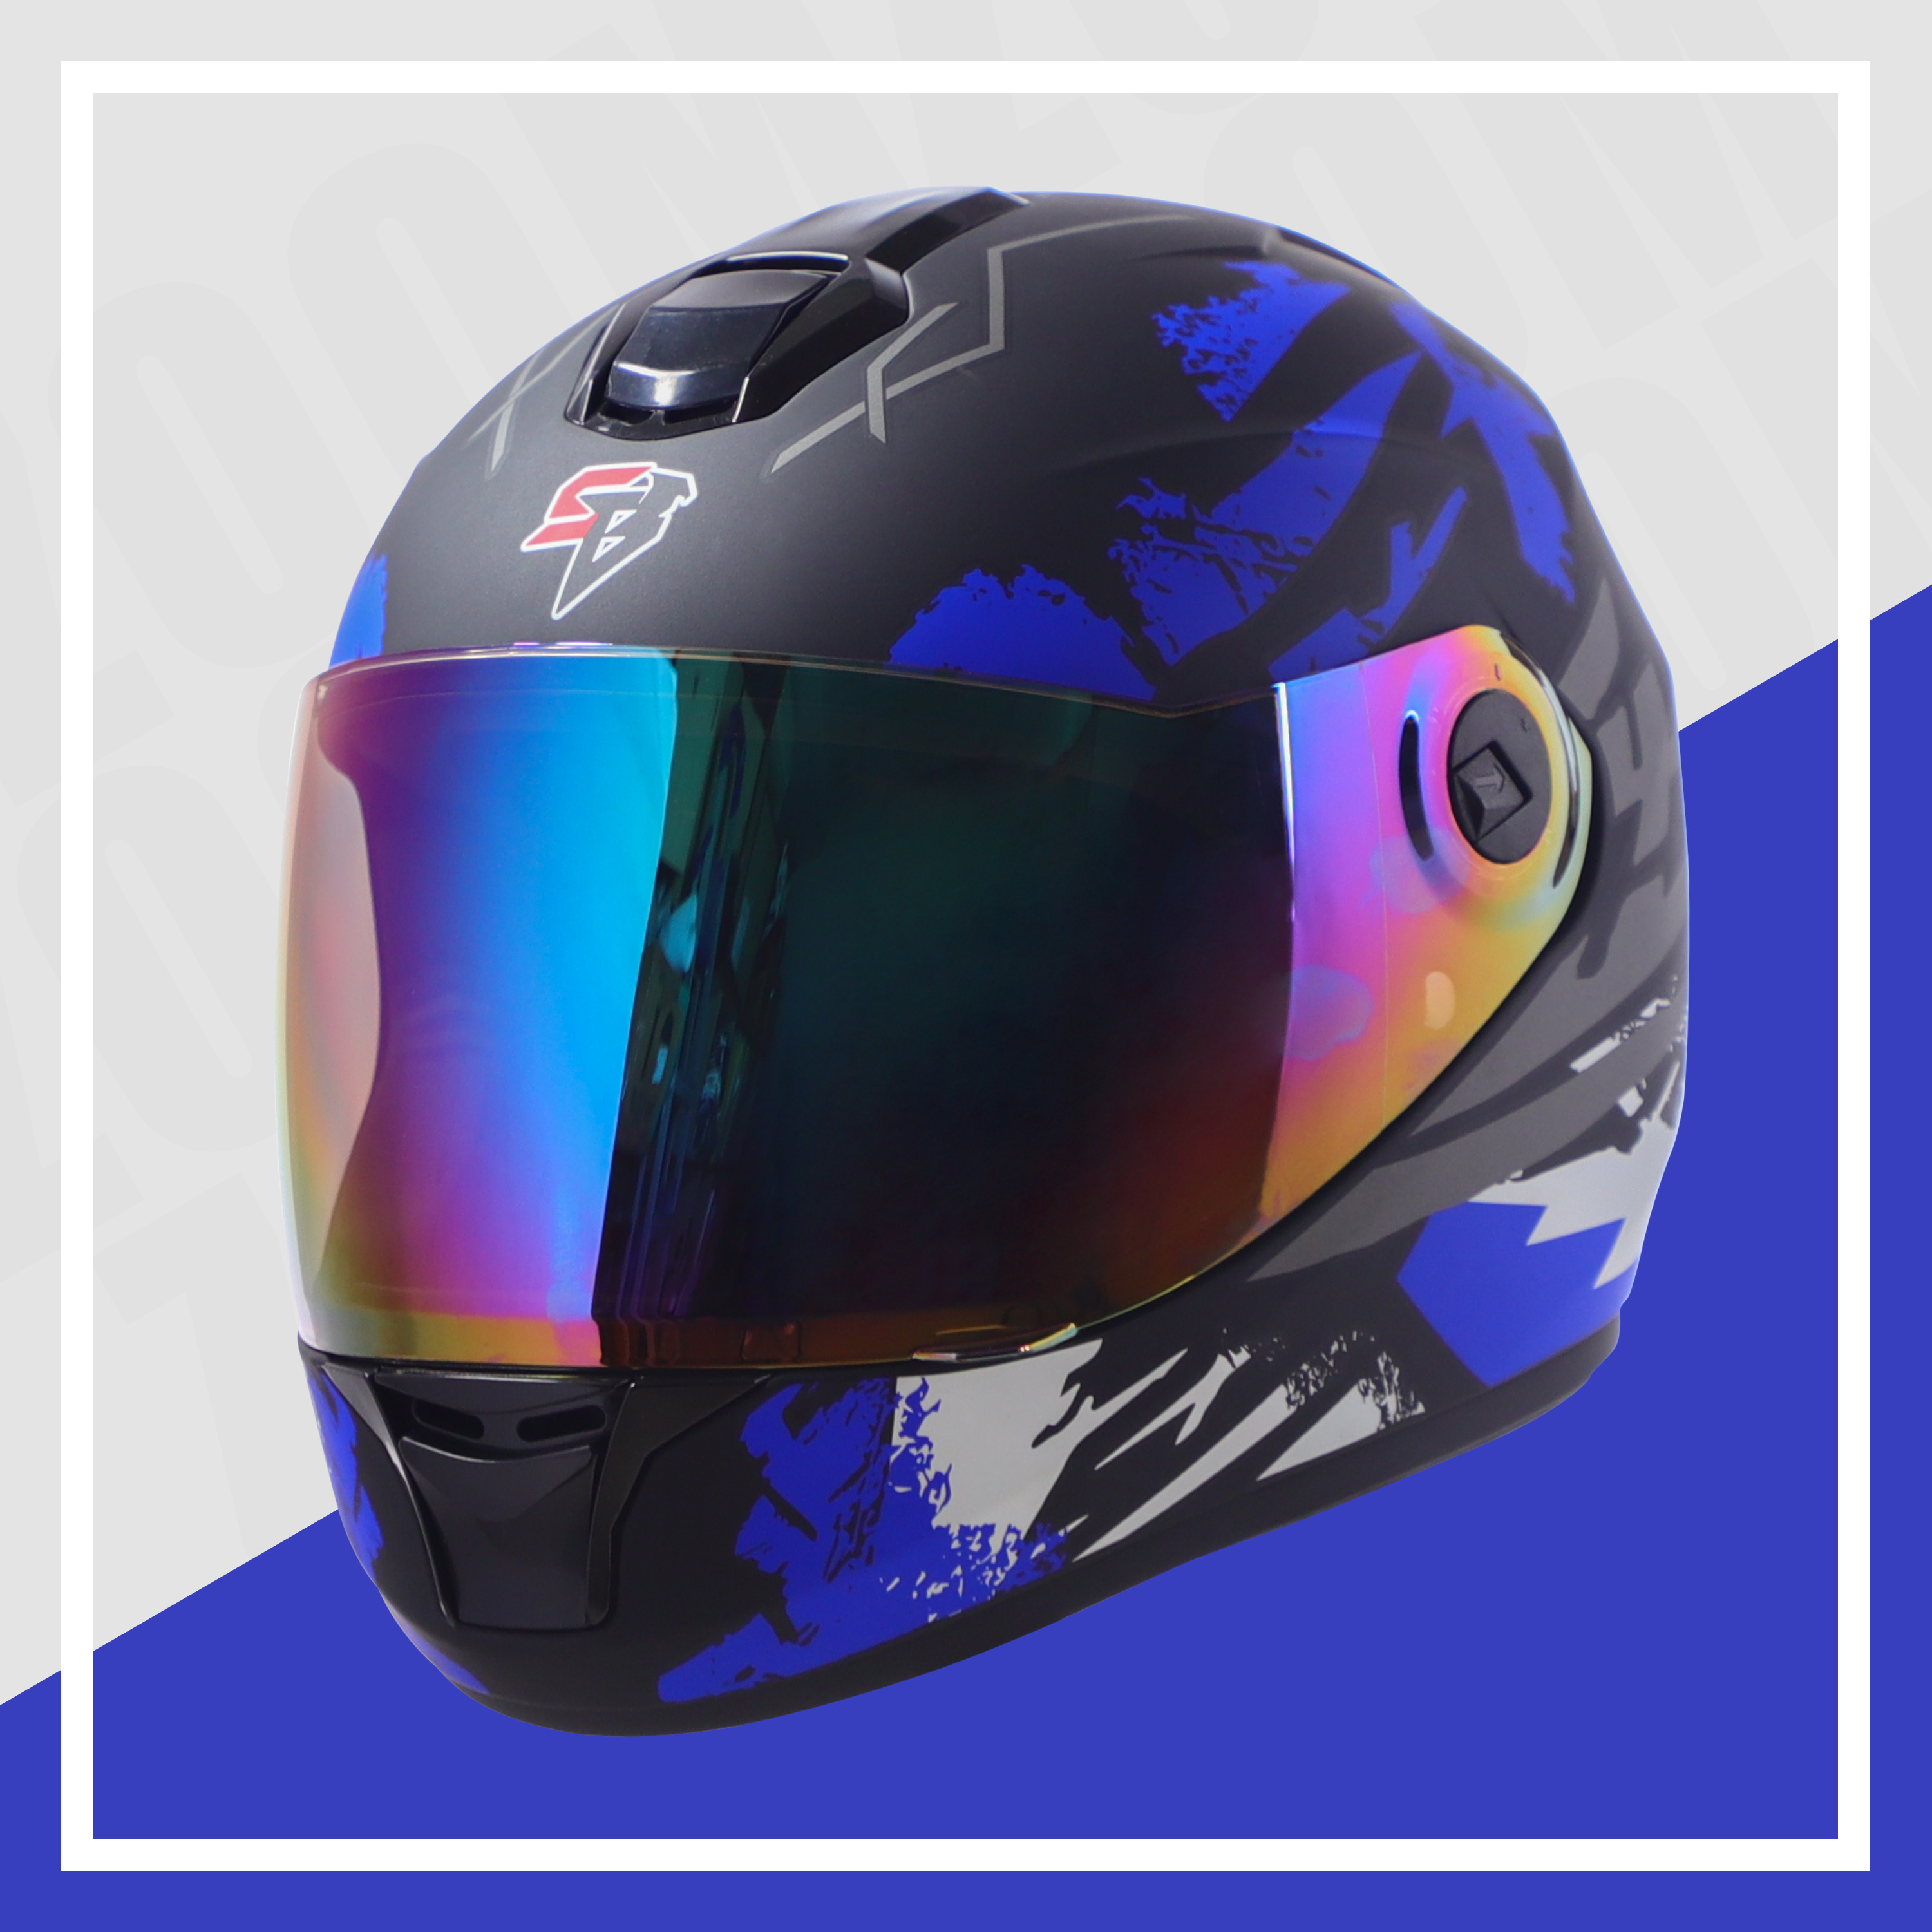 Steelbird SBH-11 Zoom Racer ISI Certified Full Face Graphic Helmet For Men And Women (Glossy Black Blue With Chrome Rainbow Visor)